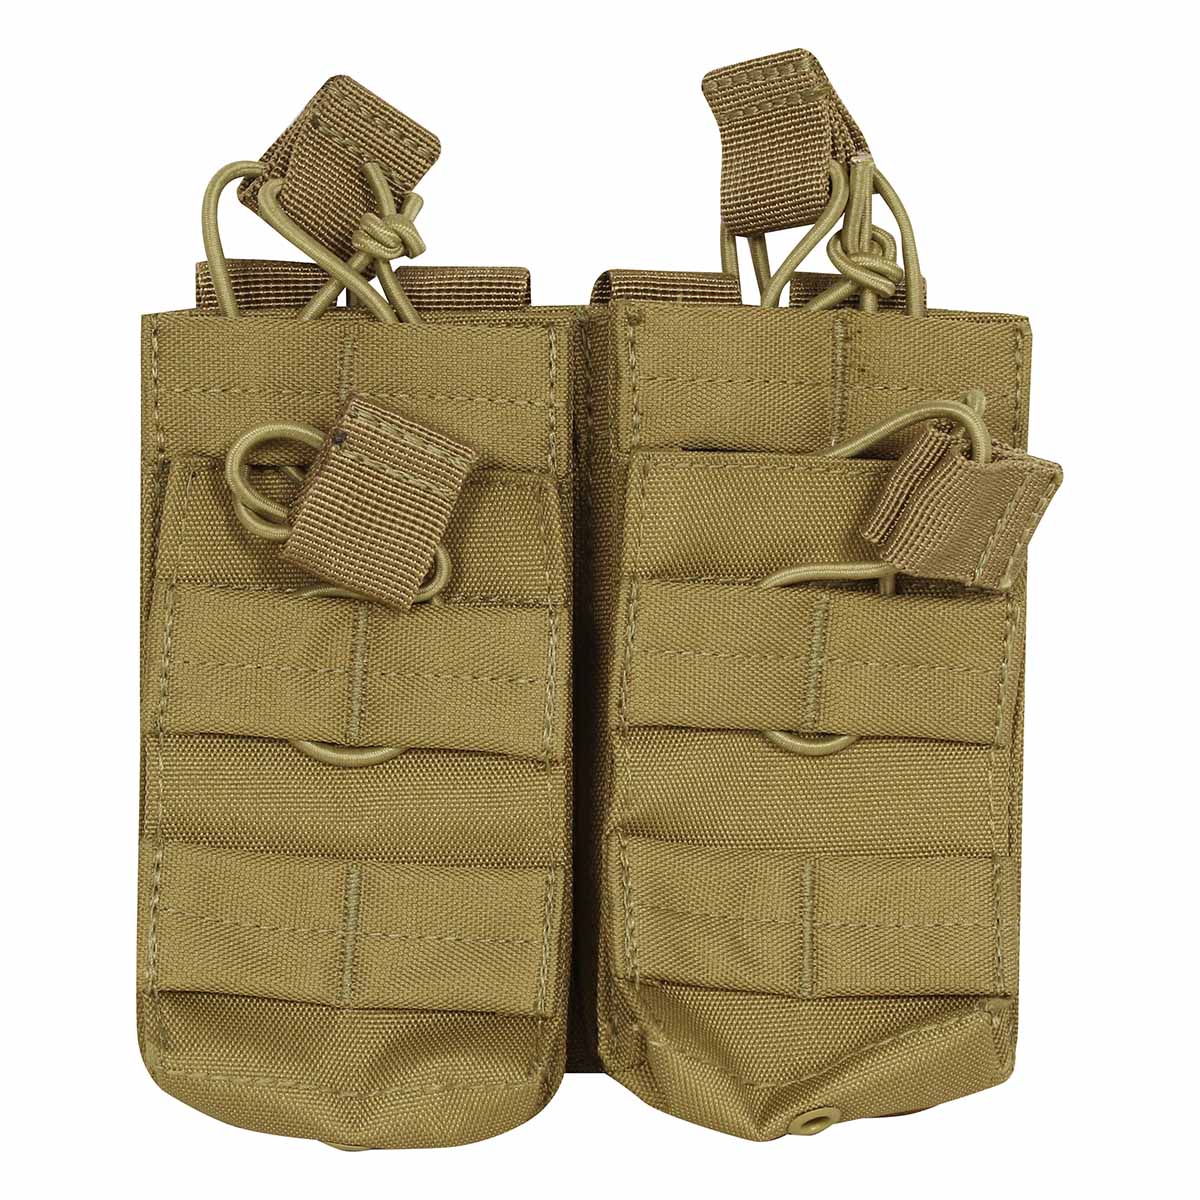 A60932 Duo double Mag pouch - A60931